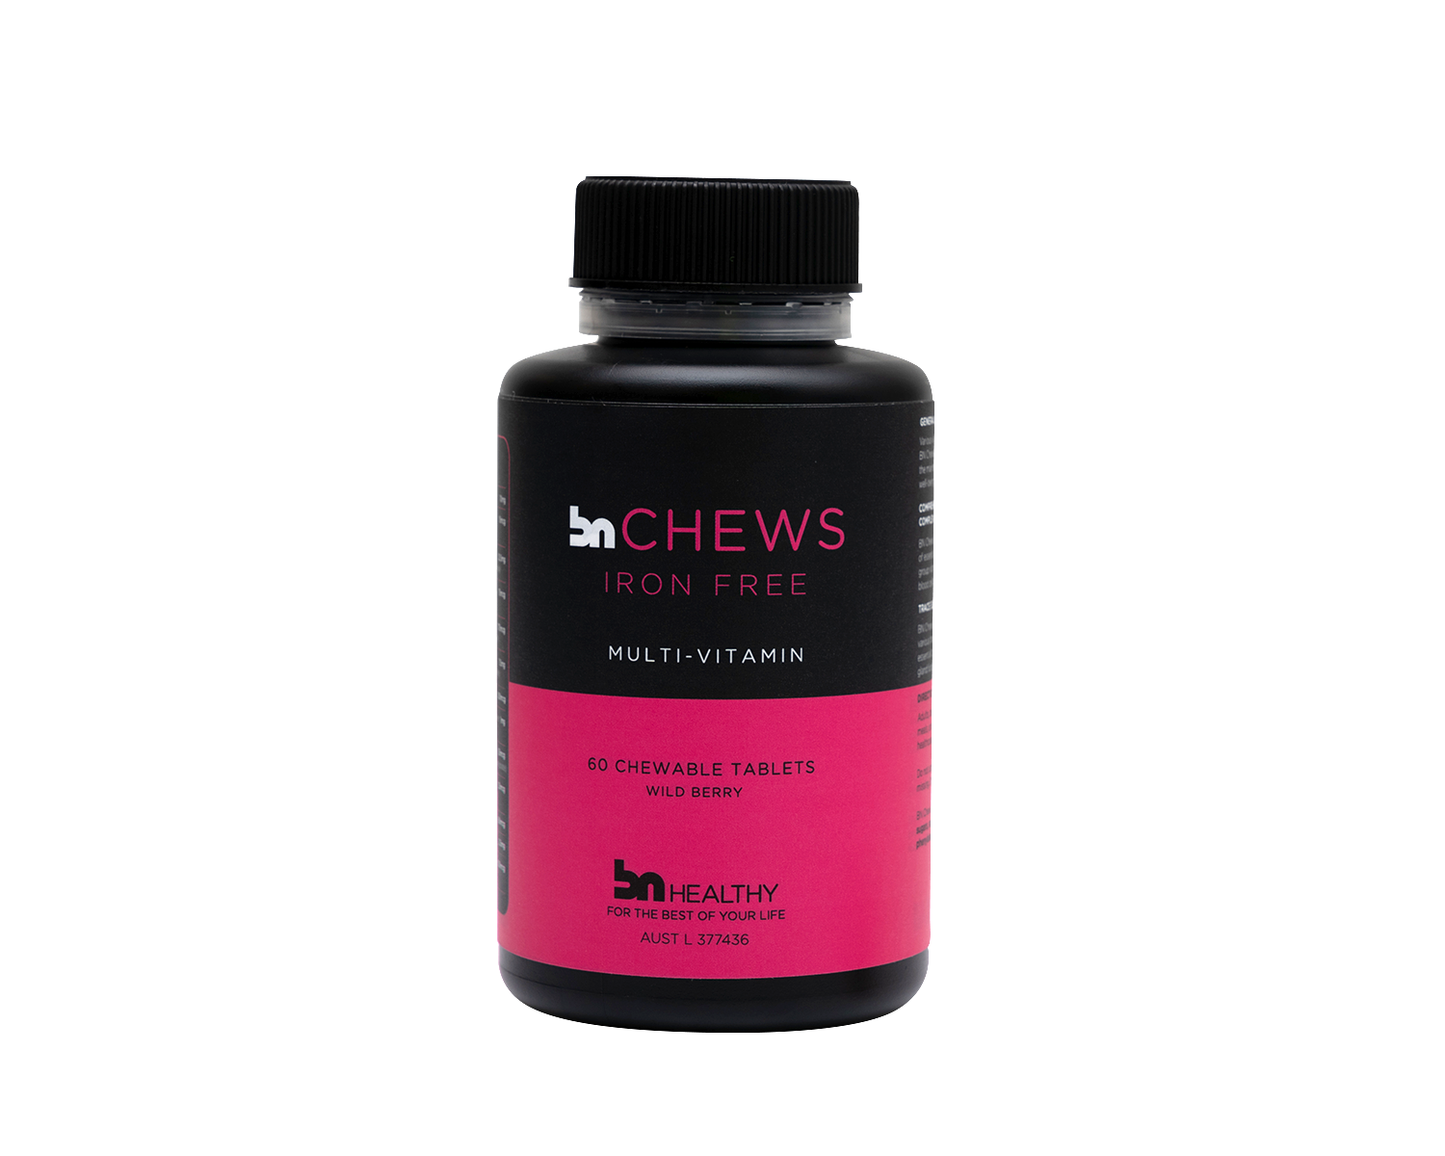 BN Chews Iron Free - Chewable Multivitamins - 3 Month Subscription - Save 15%